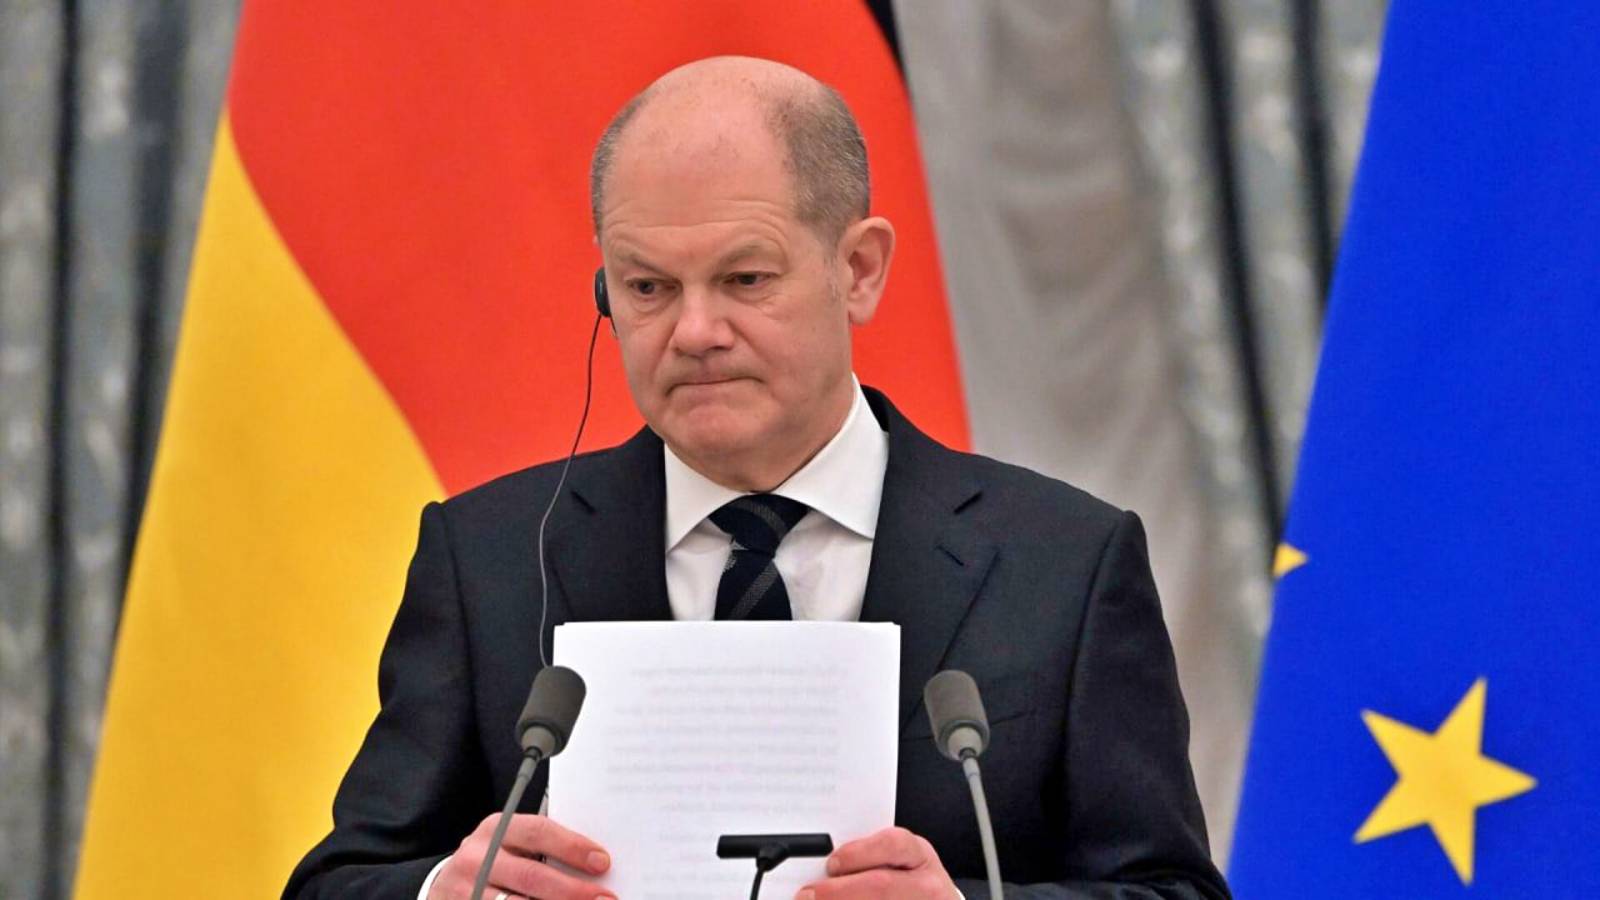 Olaf Scholz Opposes the Delivery of Powerful Weapons to Ukraine